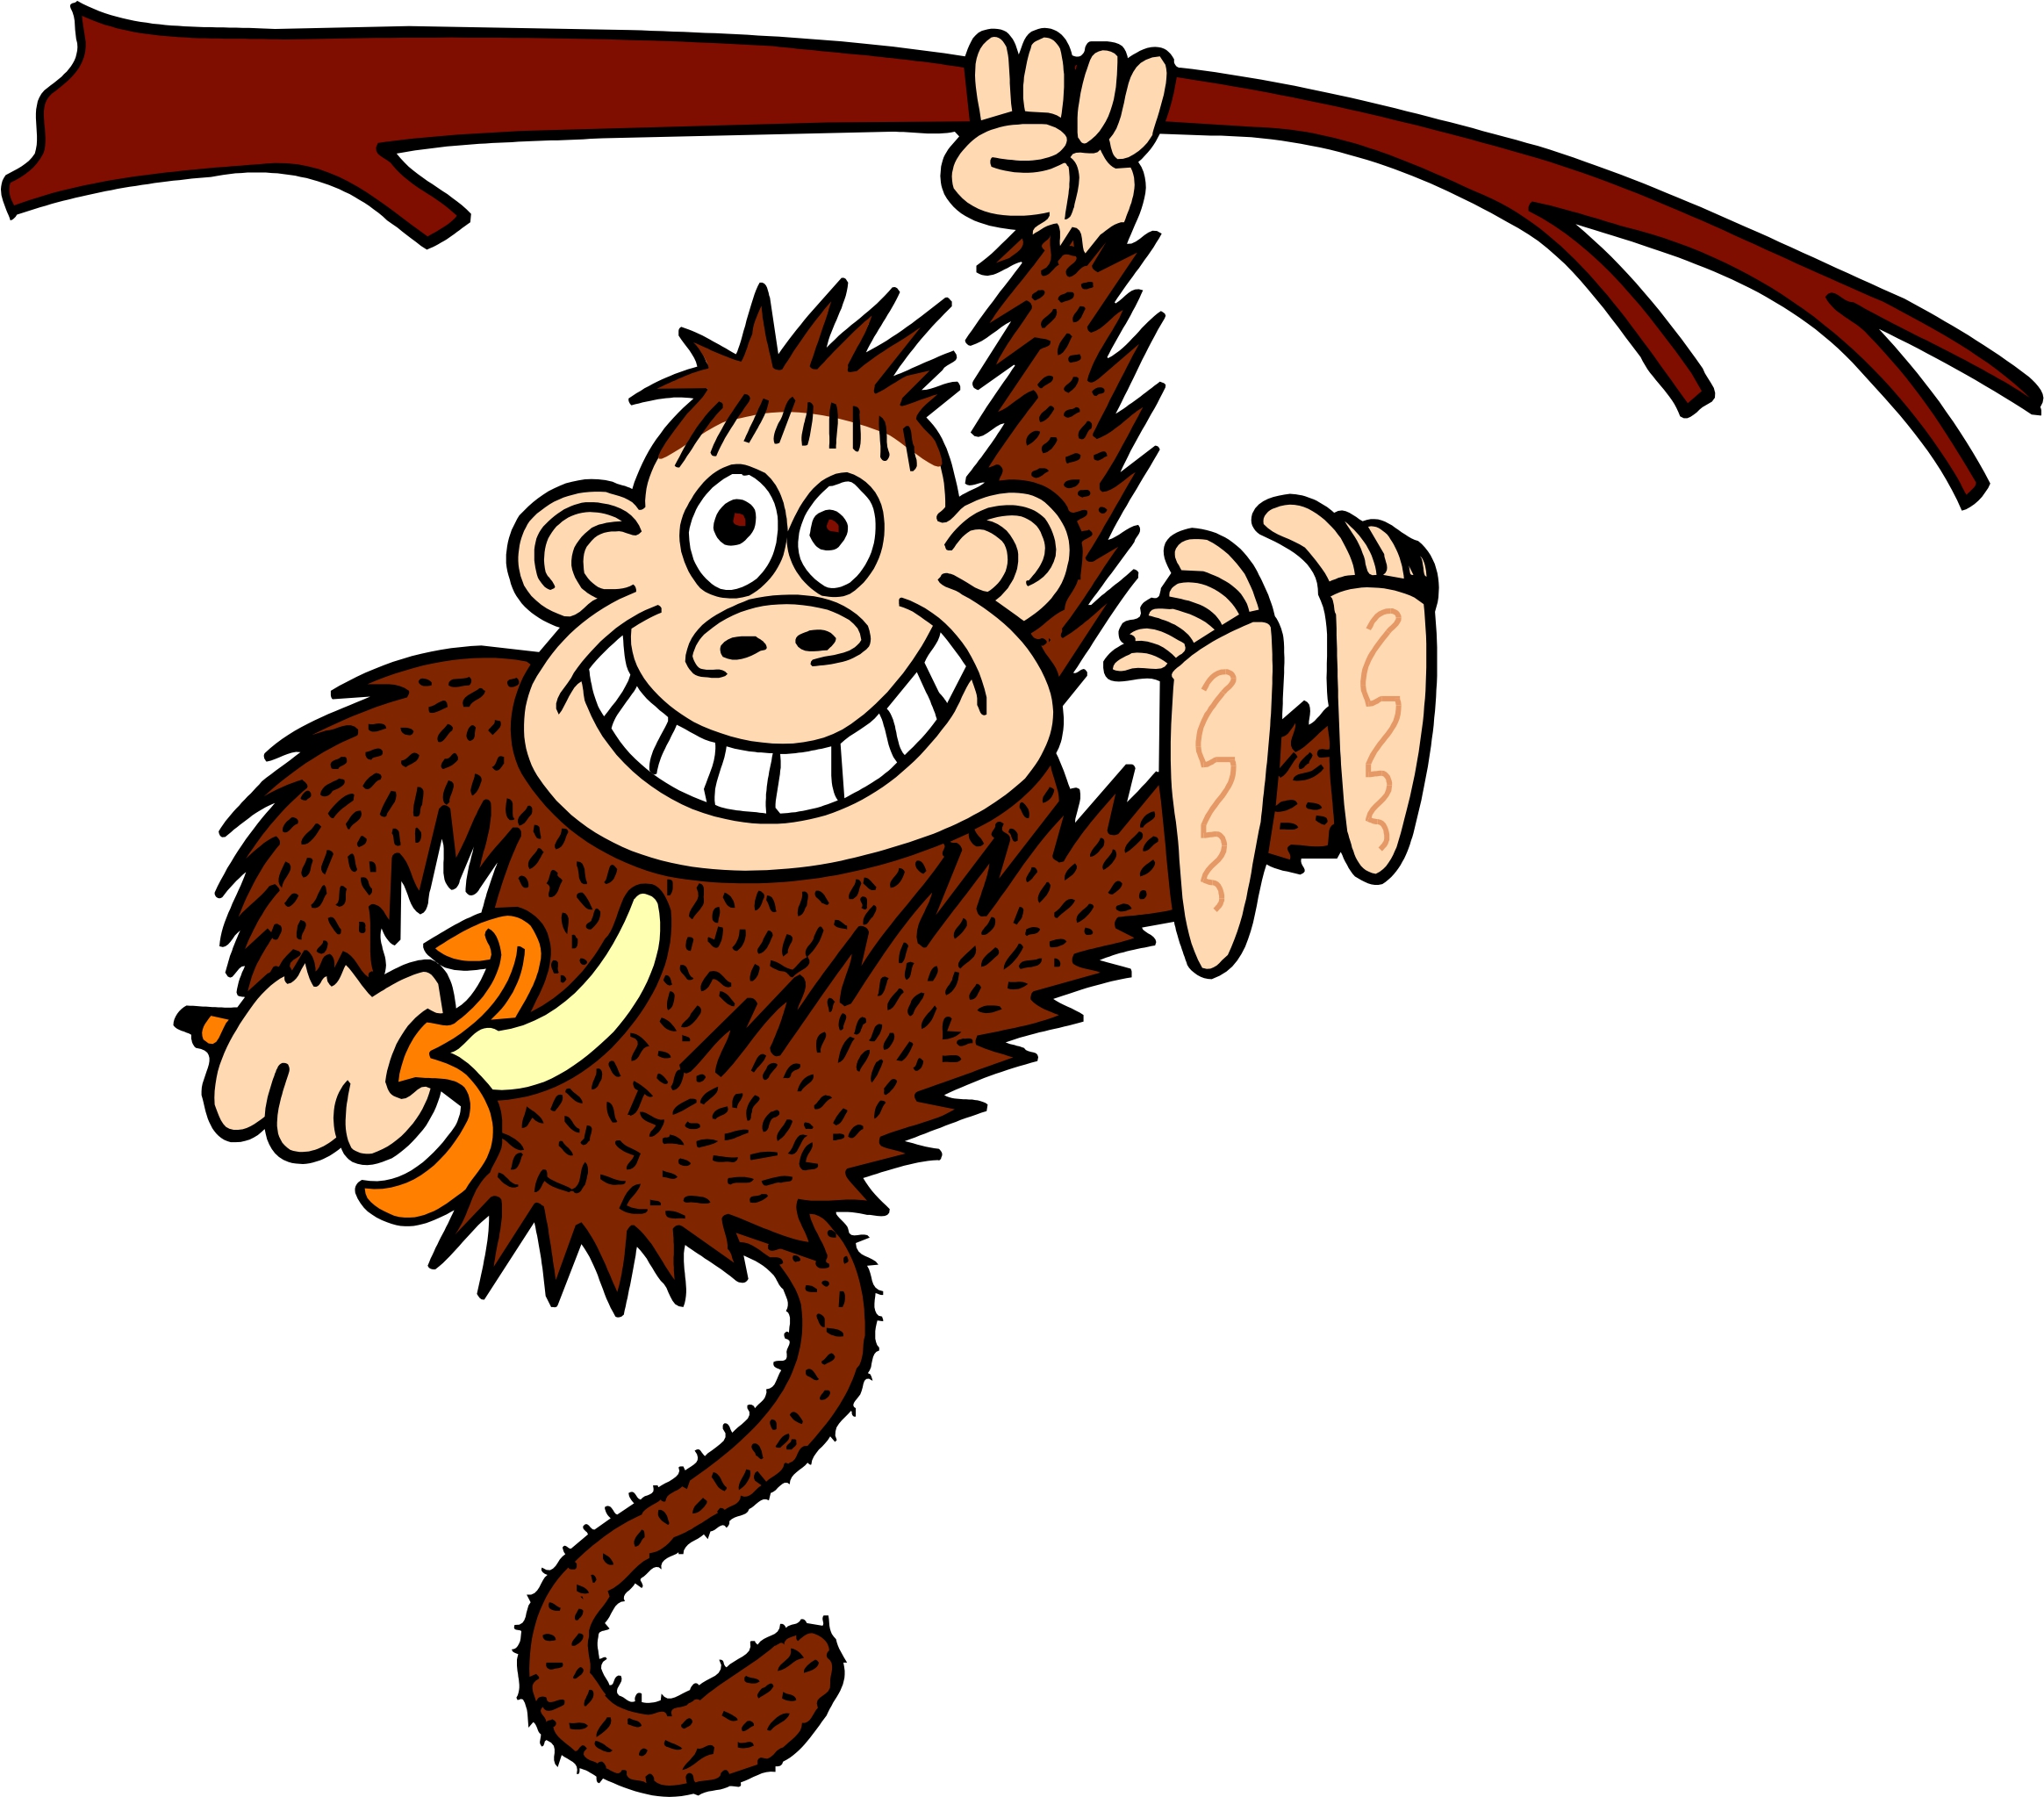 Wallpaper Download Free for PC High Resolution Cartoon Monkey ...